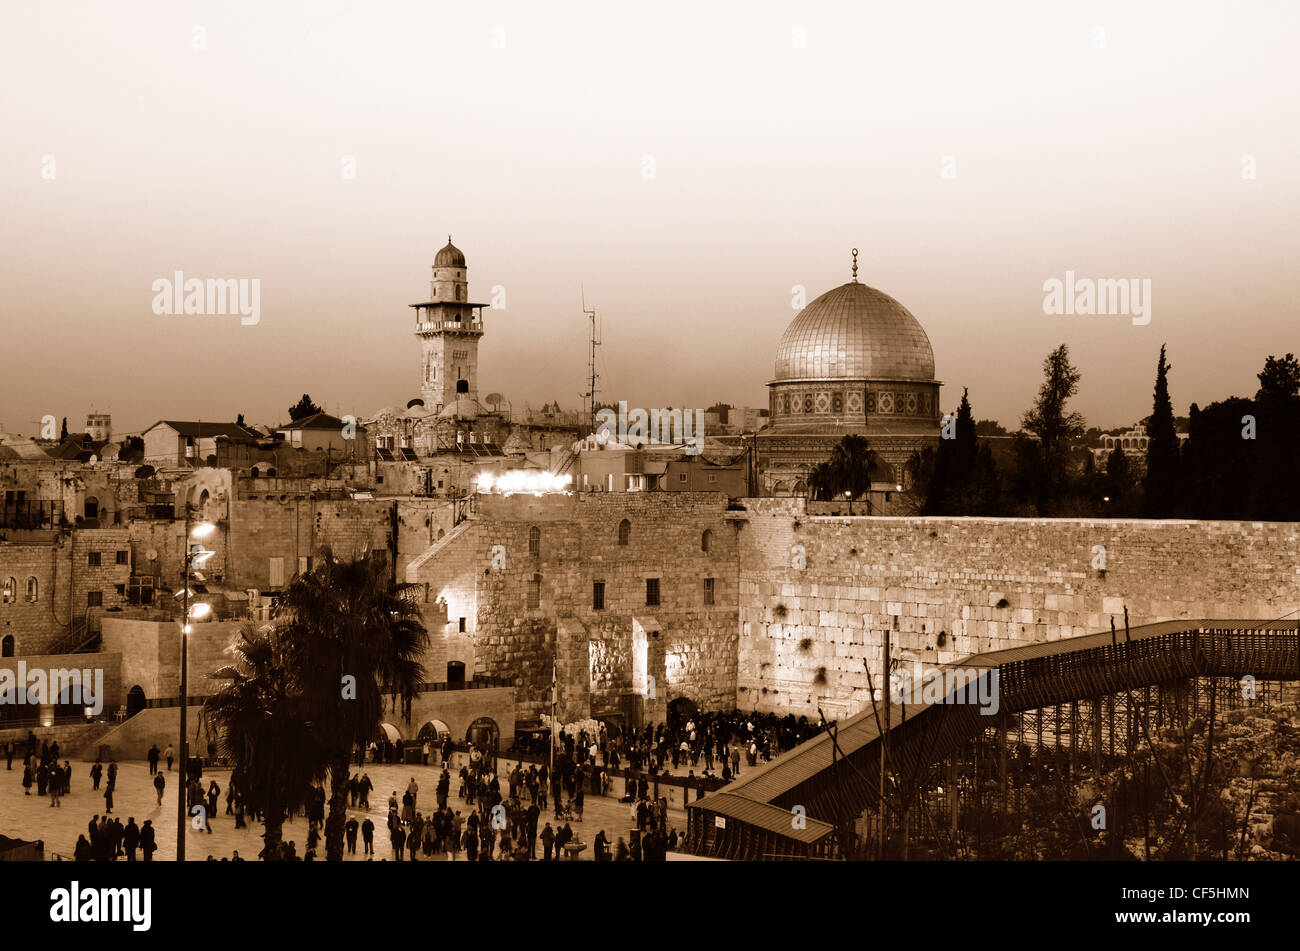 View of the Western Wall and the Dome of the Rock in the Old City of Jerusalem, Israel. Stock Photo